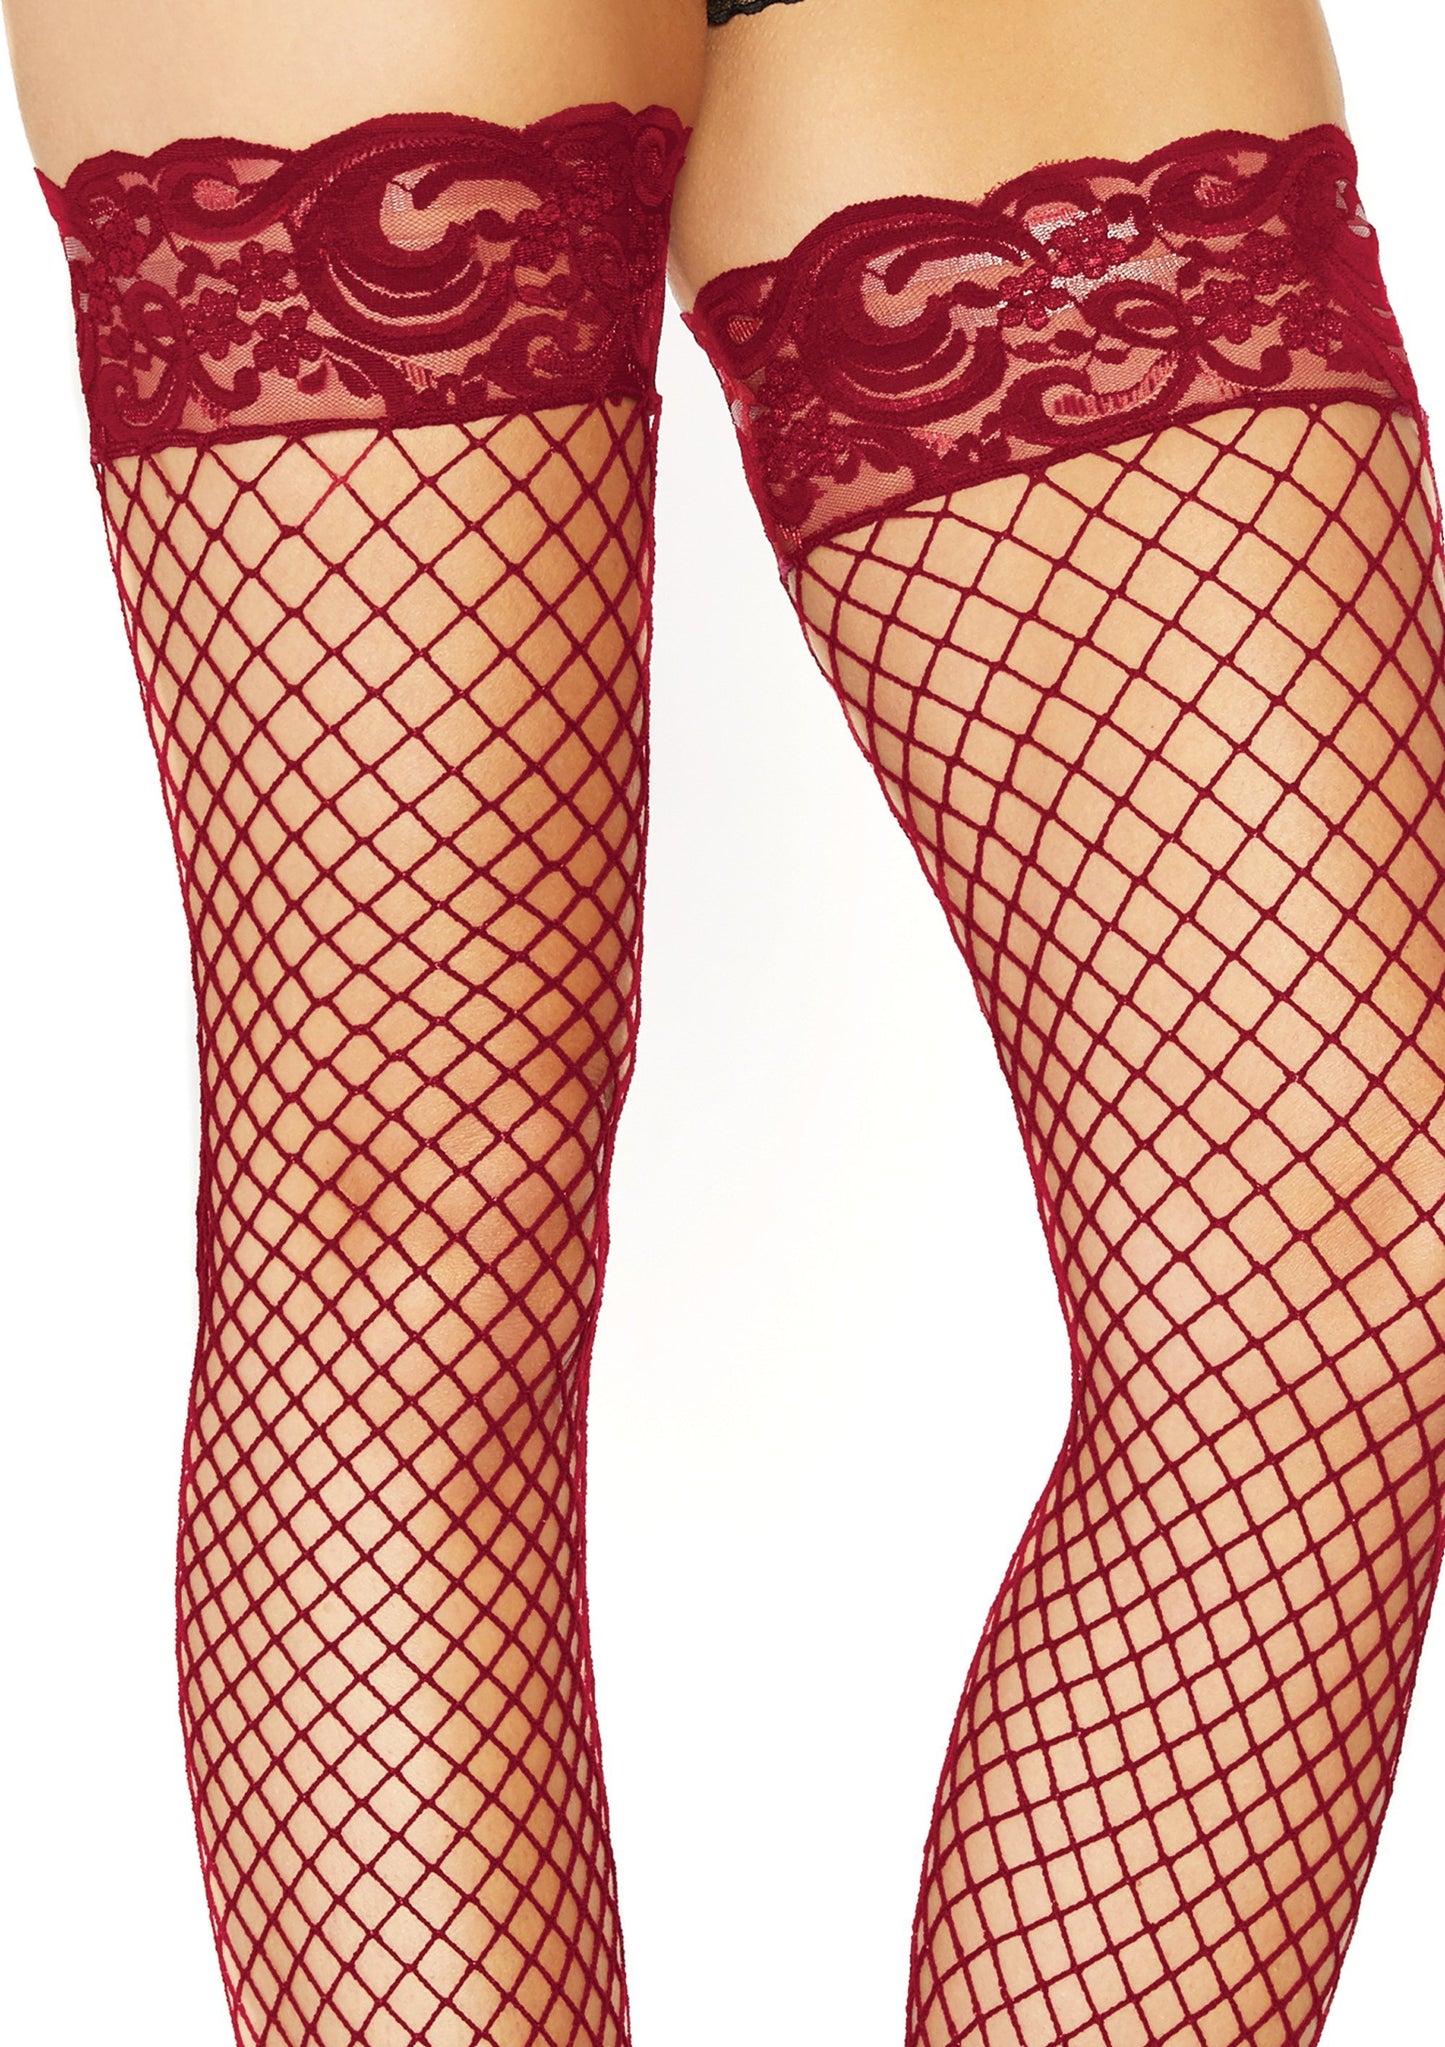 Stay Up Fishnet Thigh Highs - One Size - Burgundy